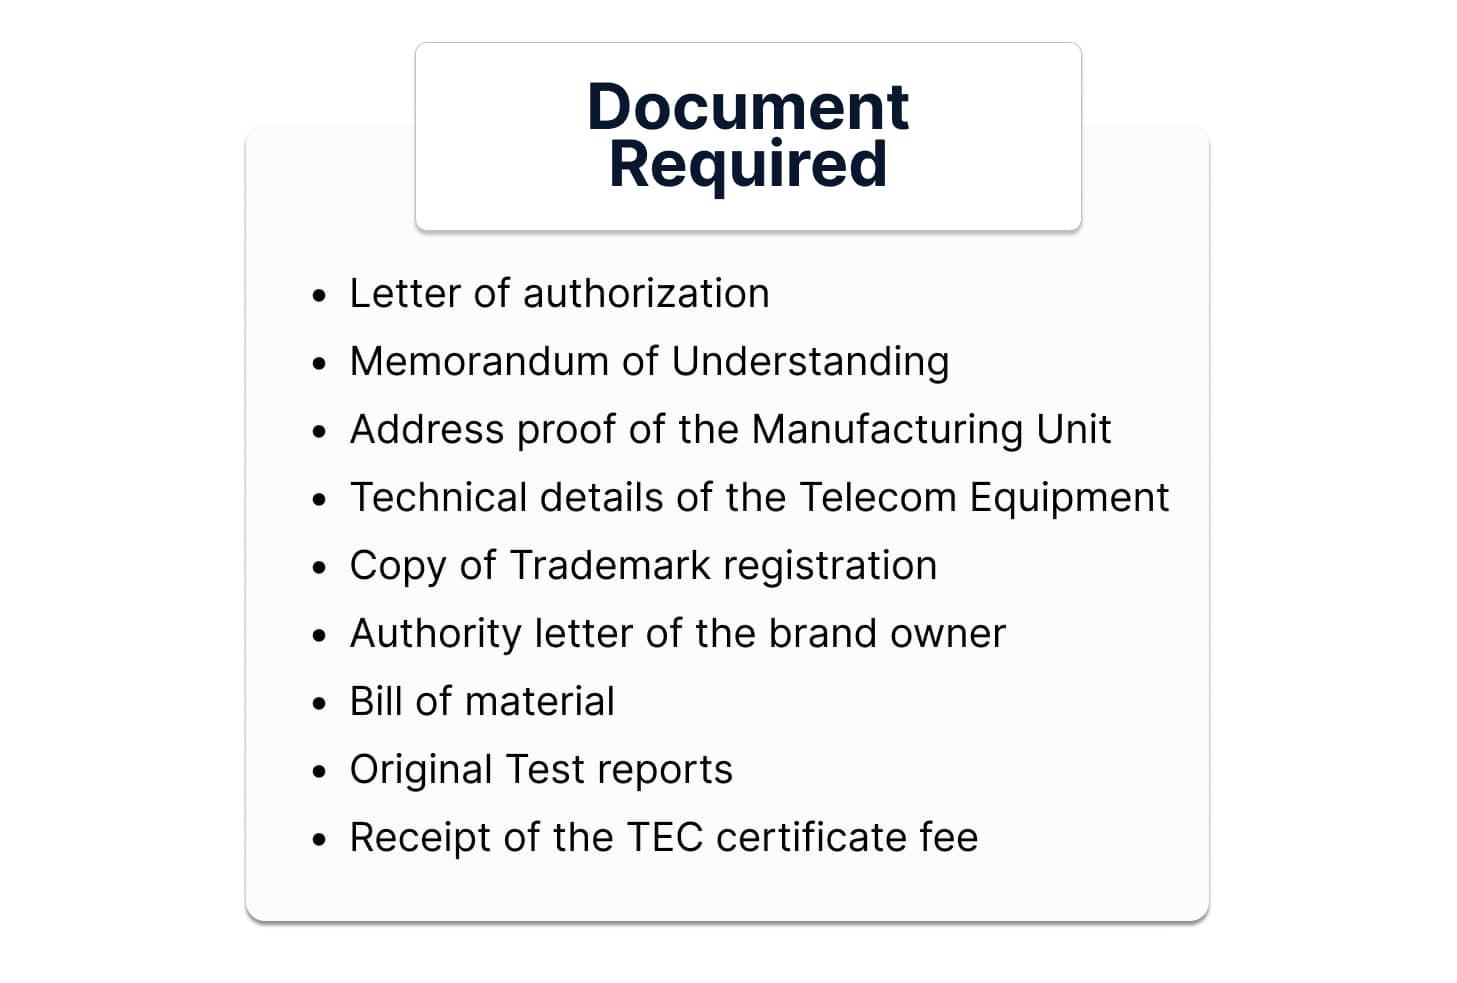 Document Required for tec certificate registration